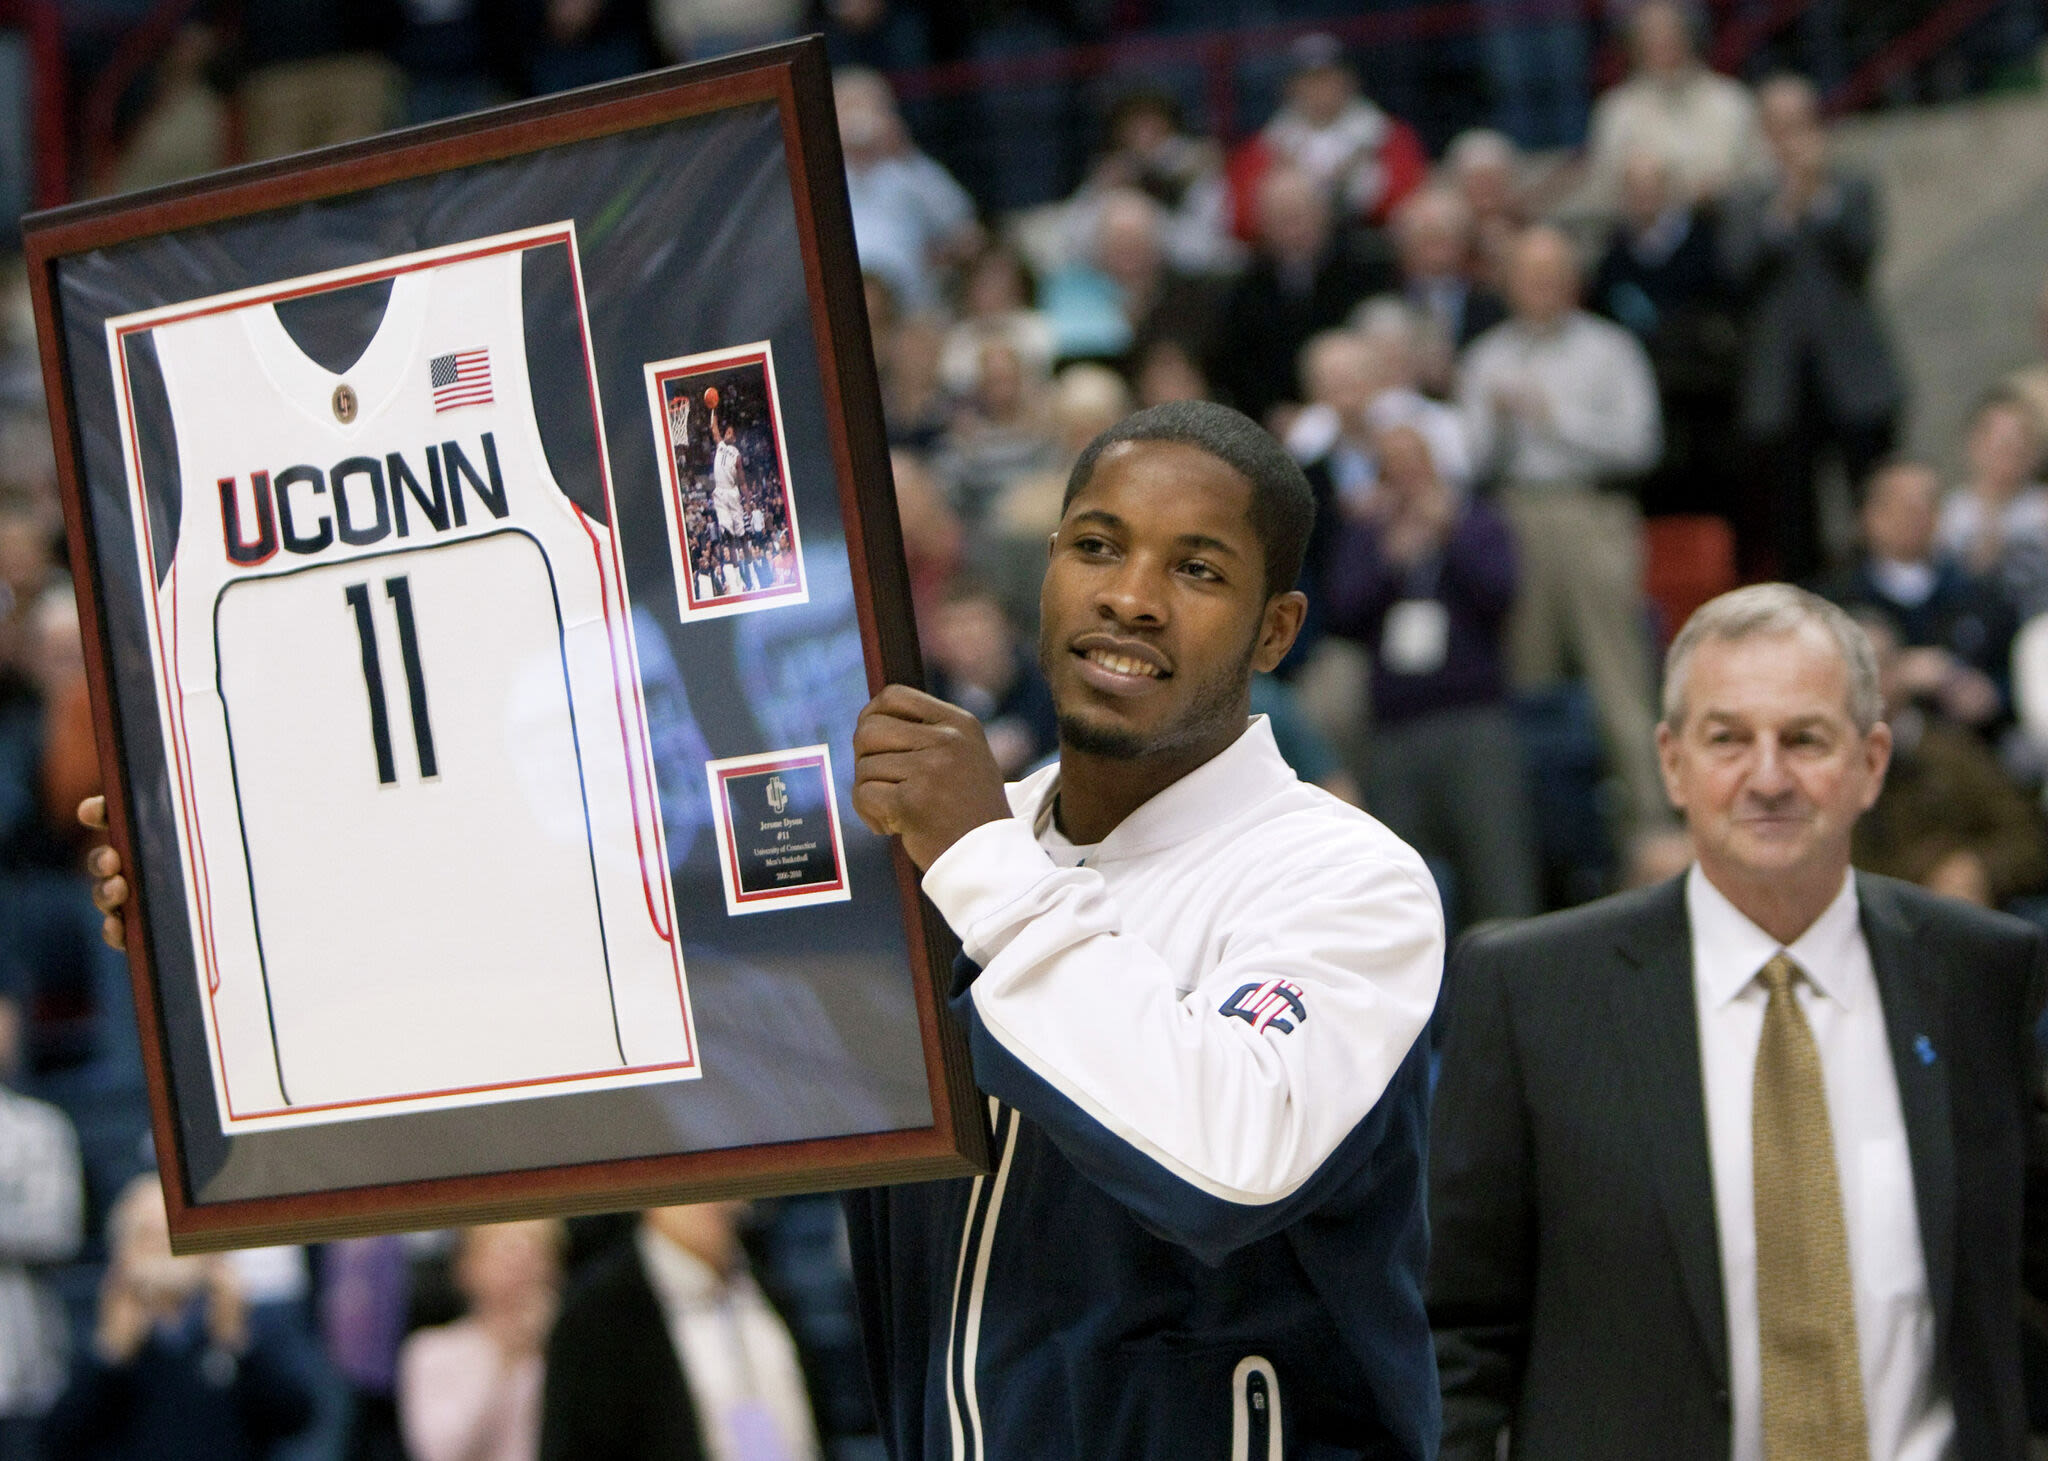 UConn alum Jerome Dyson signs on for 'Stars of Storrs' team in The Basketball Tournament